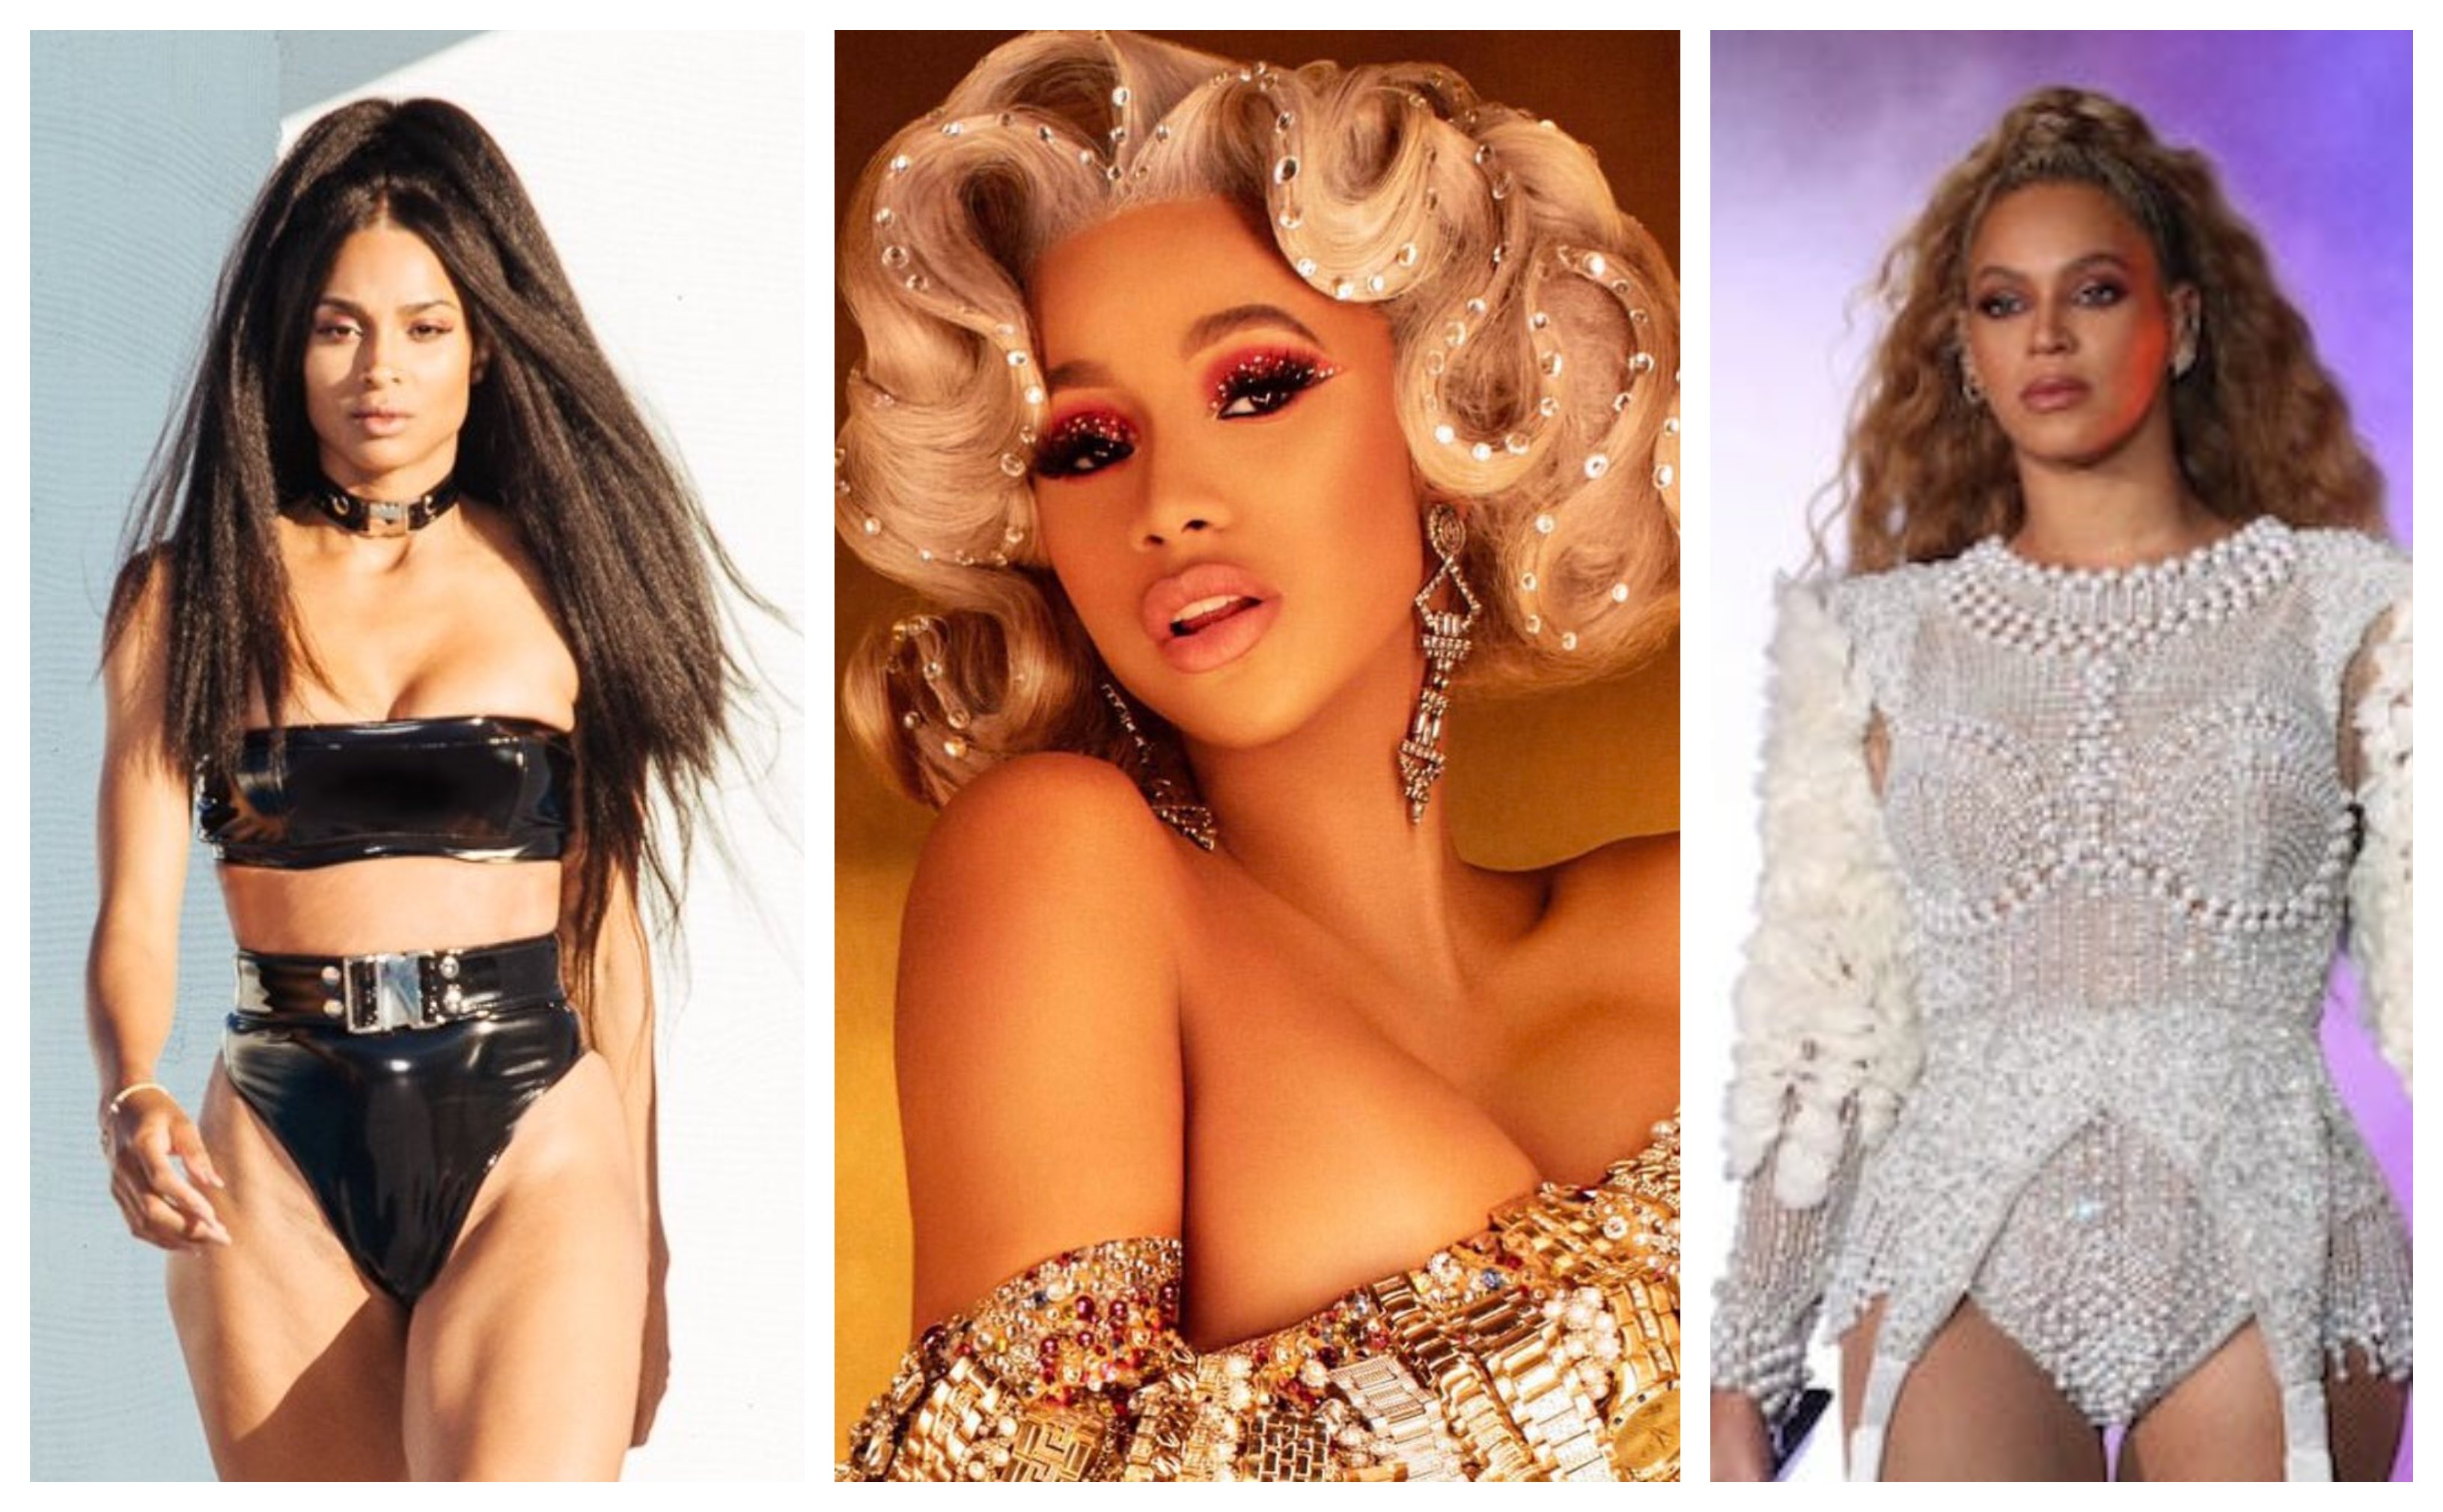 BET Awards 2019 Nominations Announced Cardi B Leads / Beyonce & Ciara